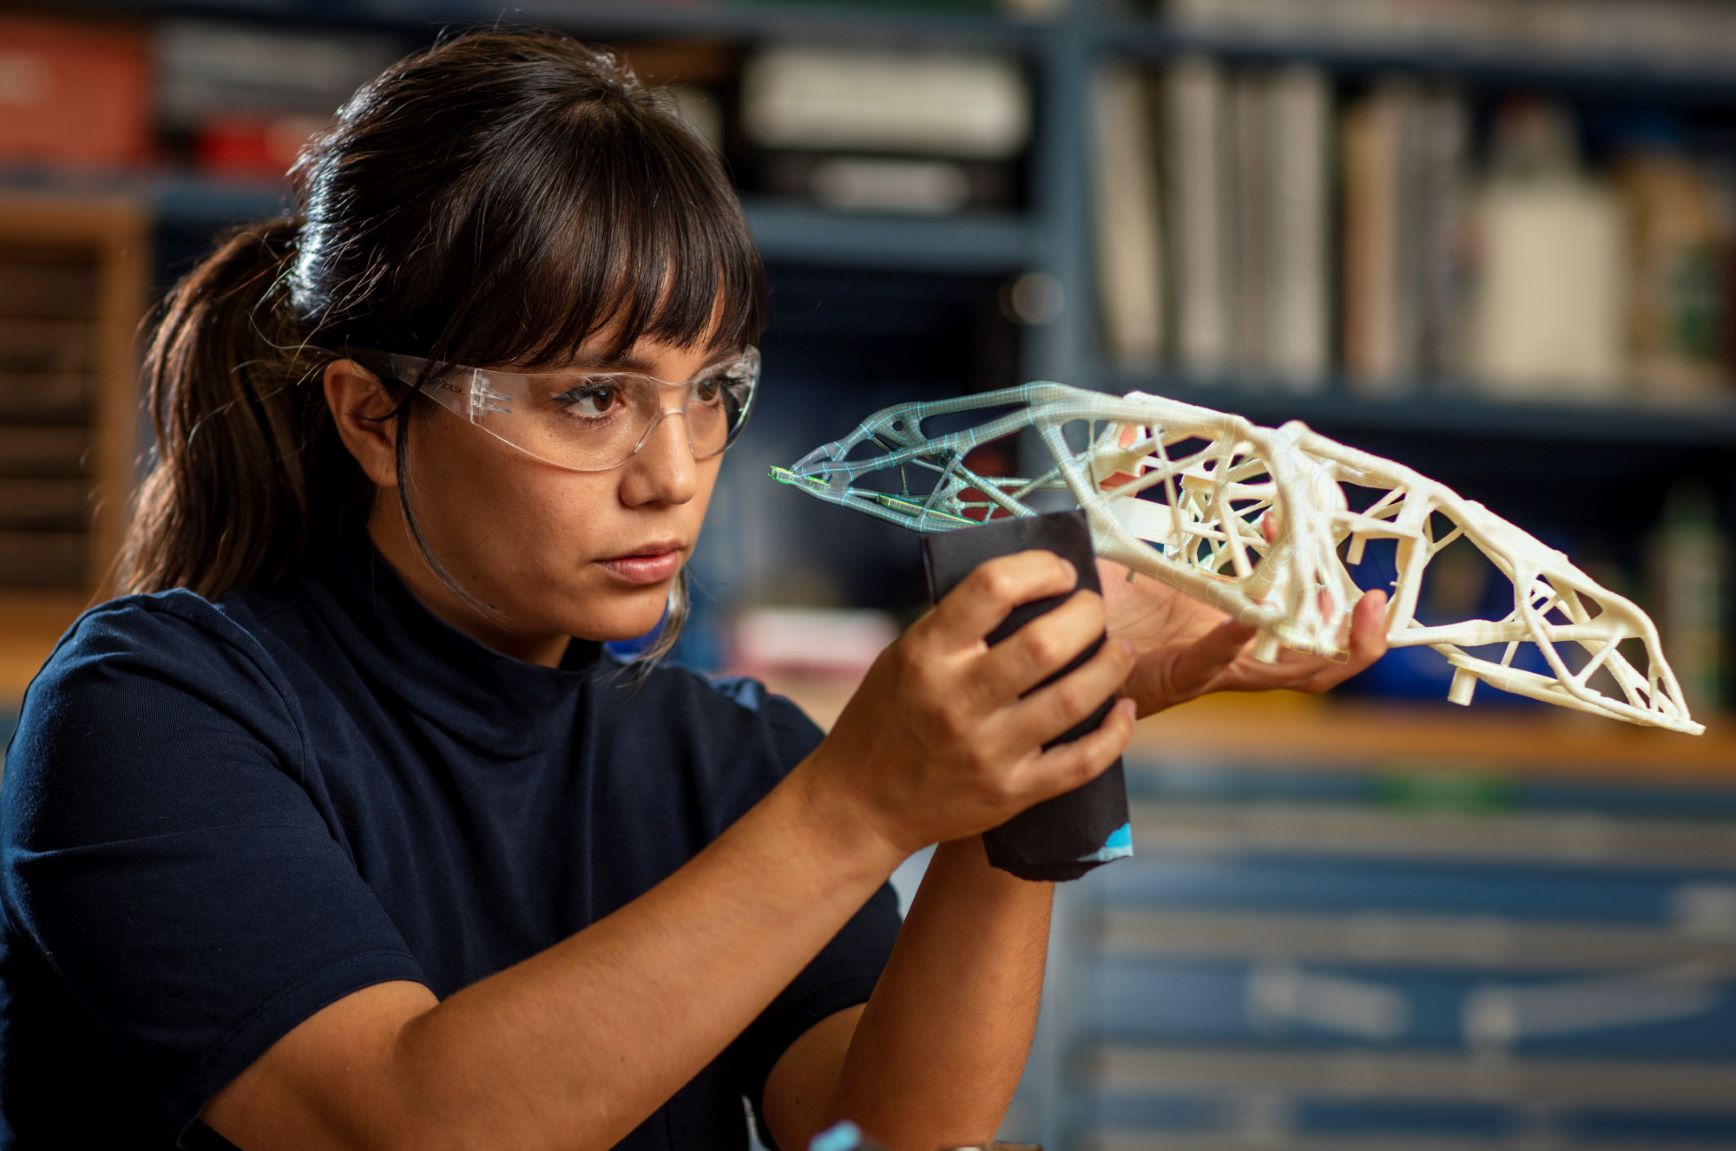 woman looking at a 3D printed object